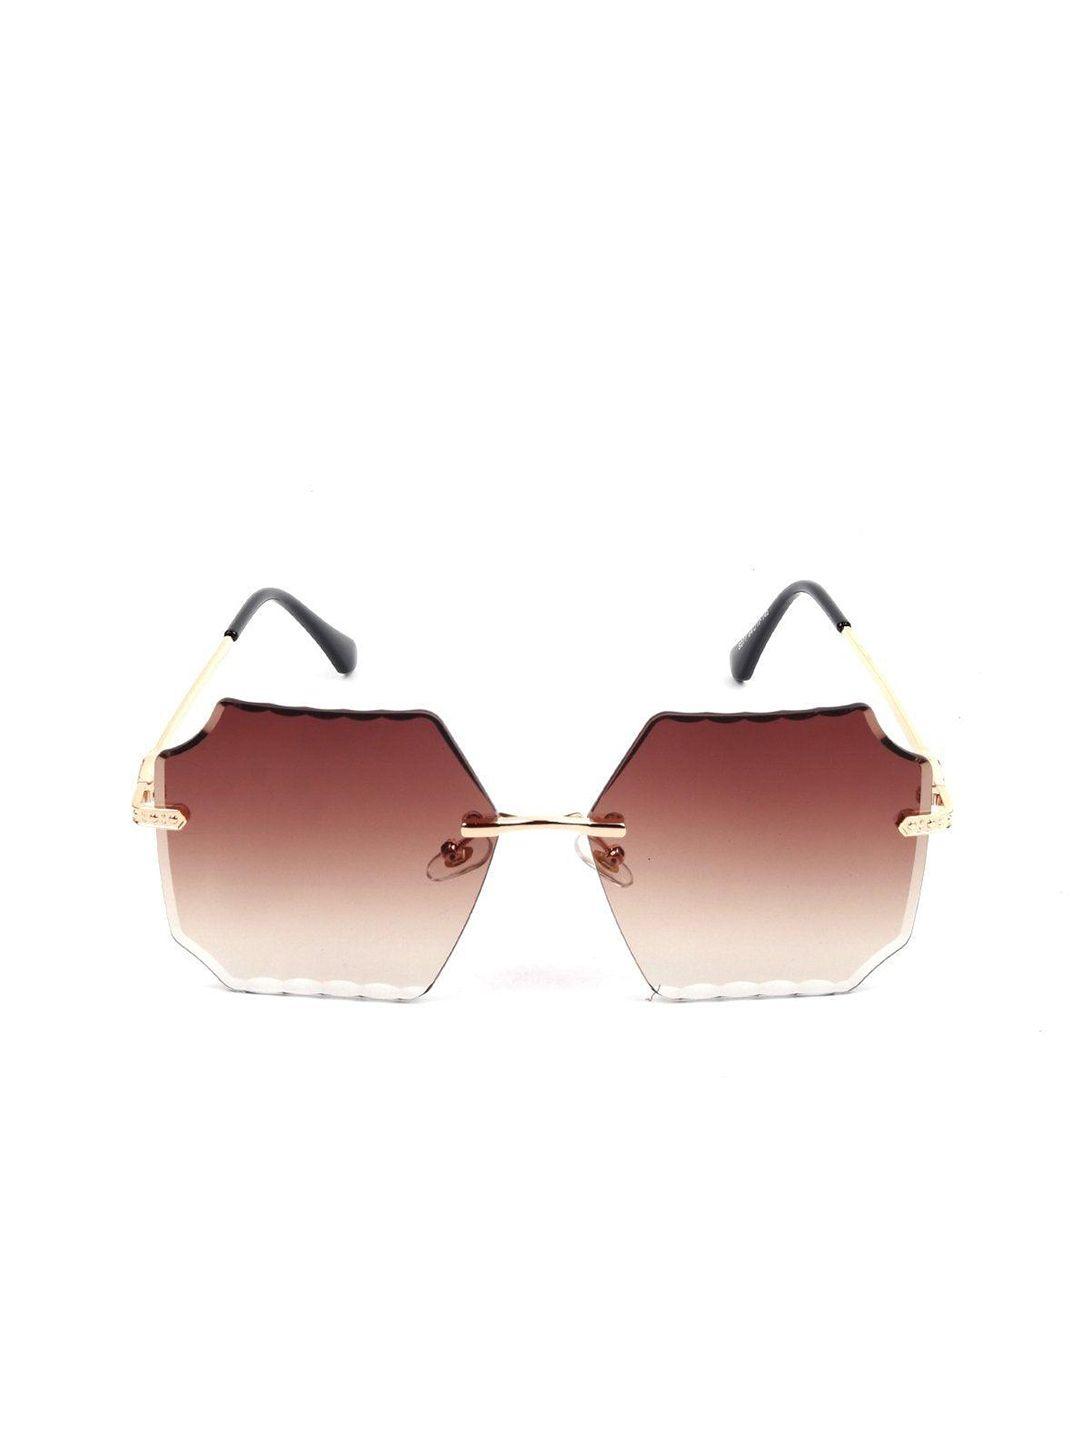 odette-women-oversized-sunglasses-with-uv-protected-lens-odt1354